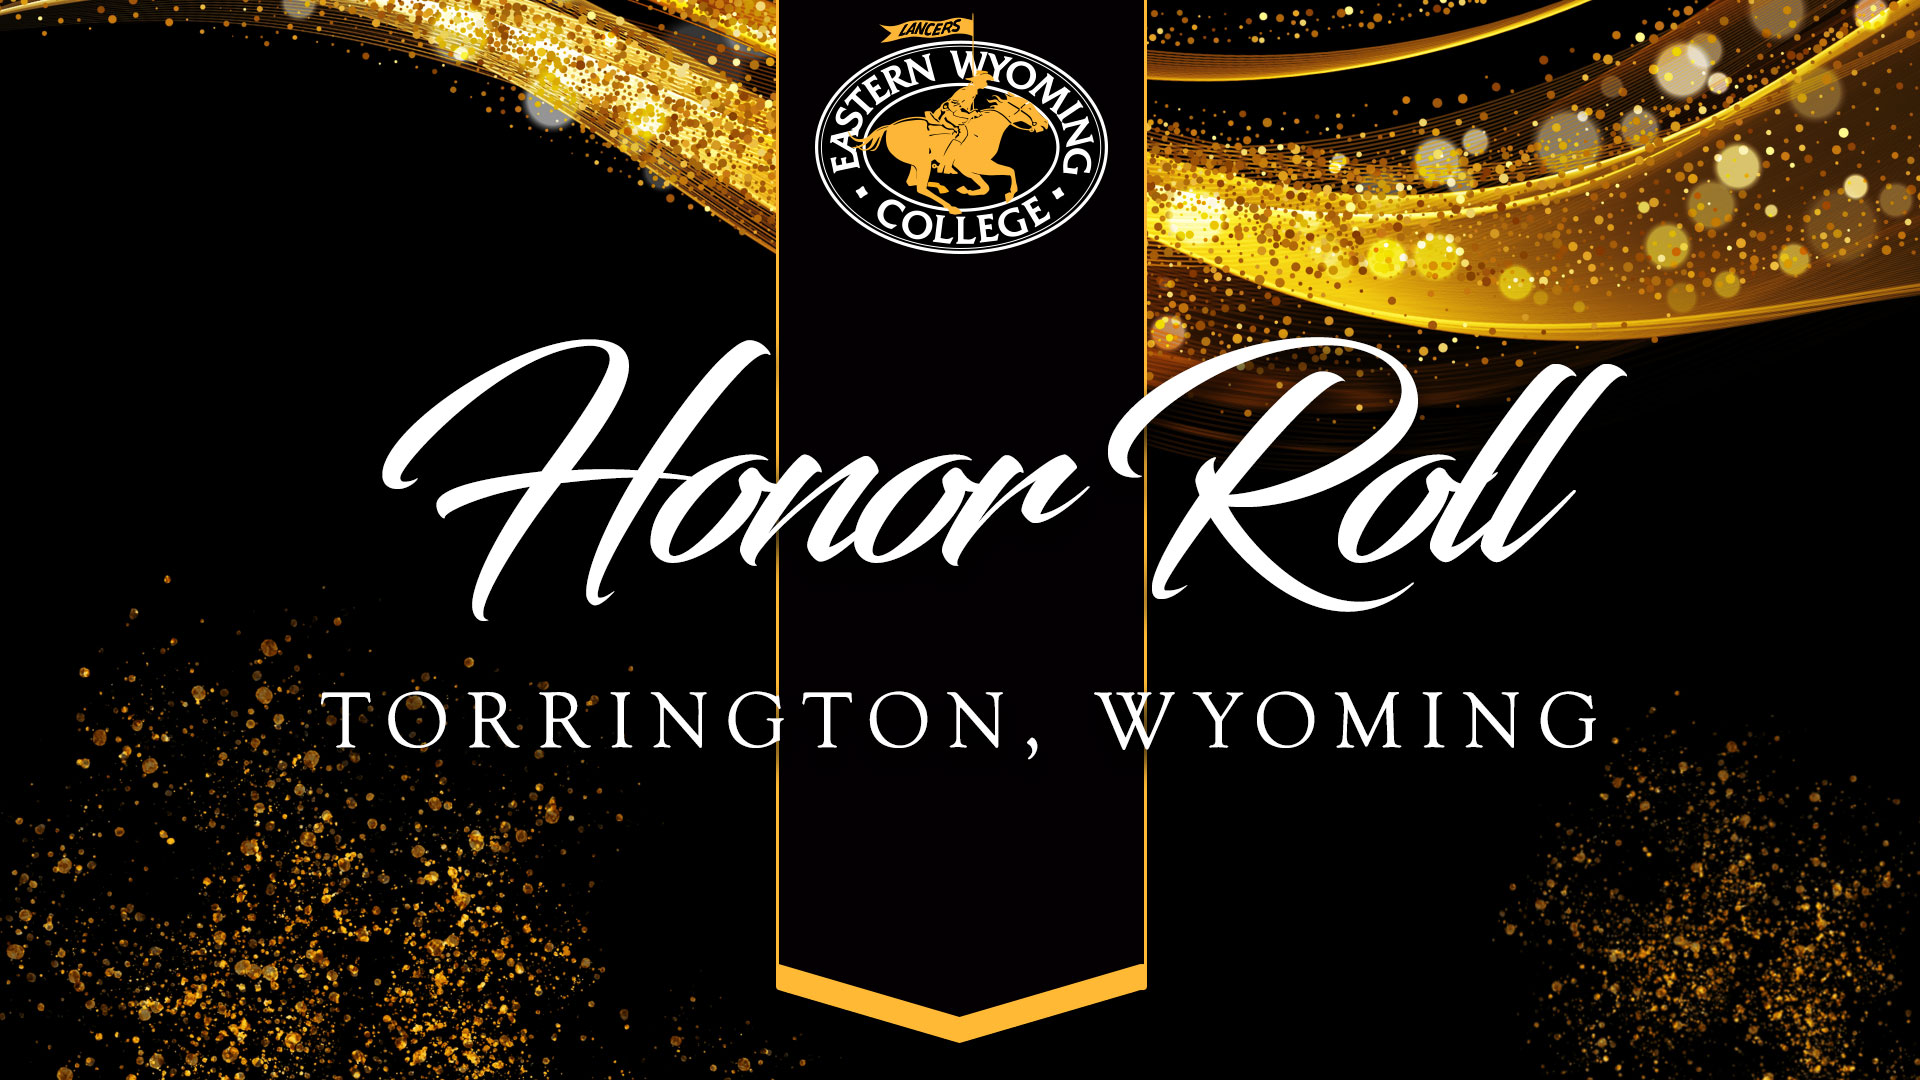 Eastern Wyoming College is pleased to announce the honor rolls for the Spring 2023 semester.